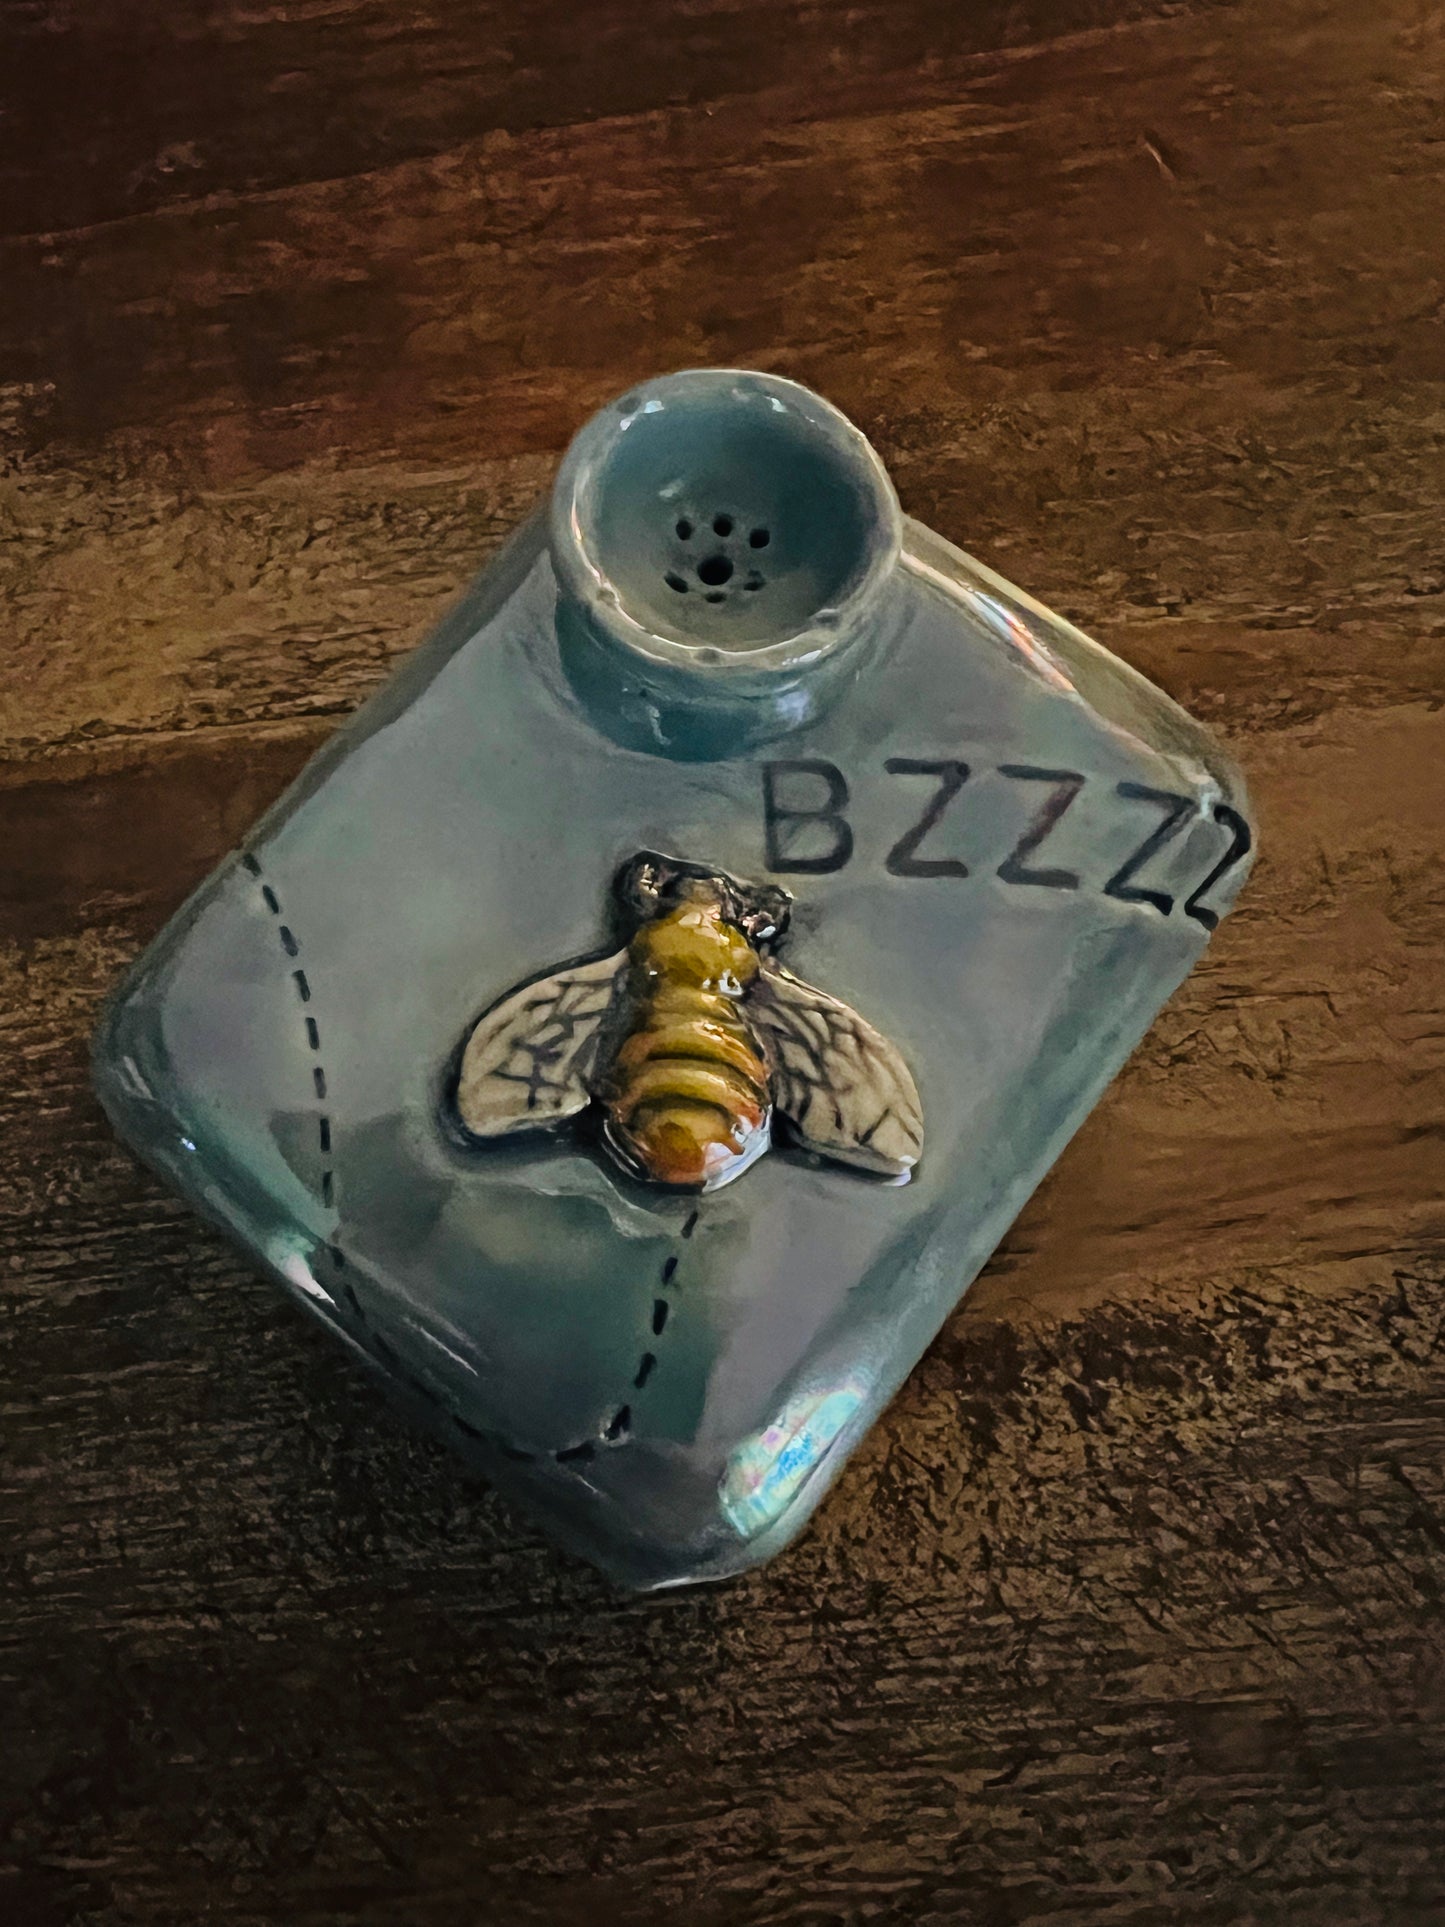 Pillow Pipe ~ “BZZZZ”